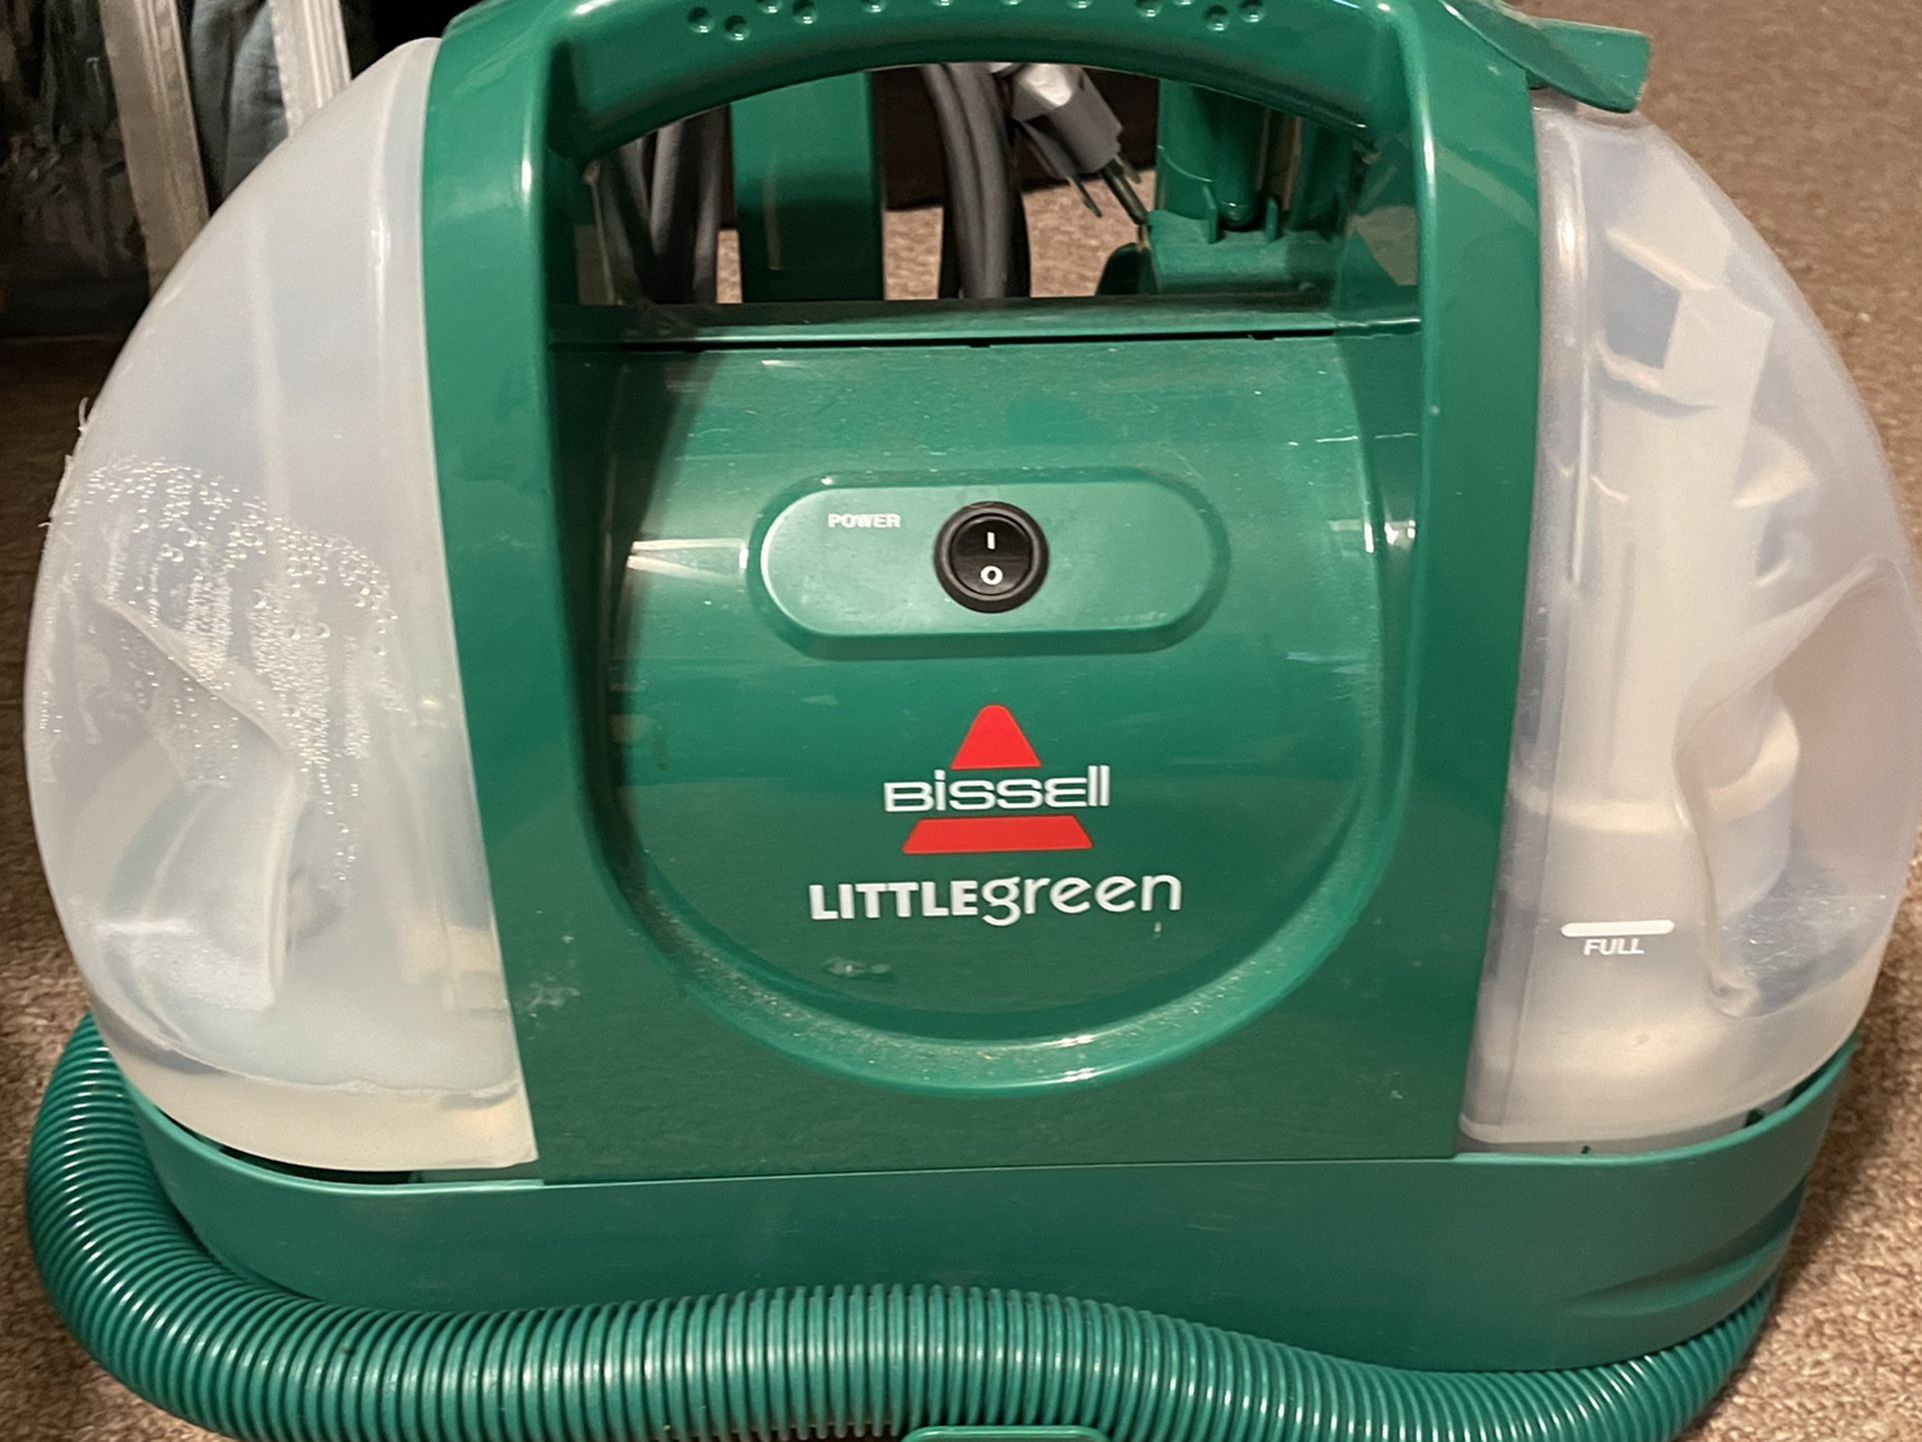 Bissell little green spot and stain cleaner